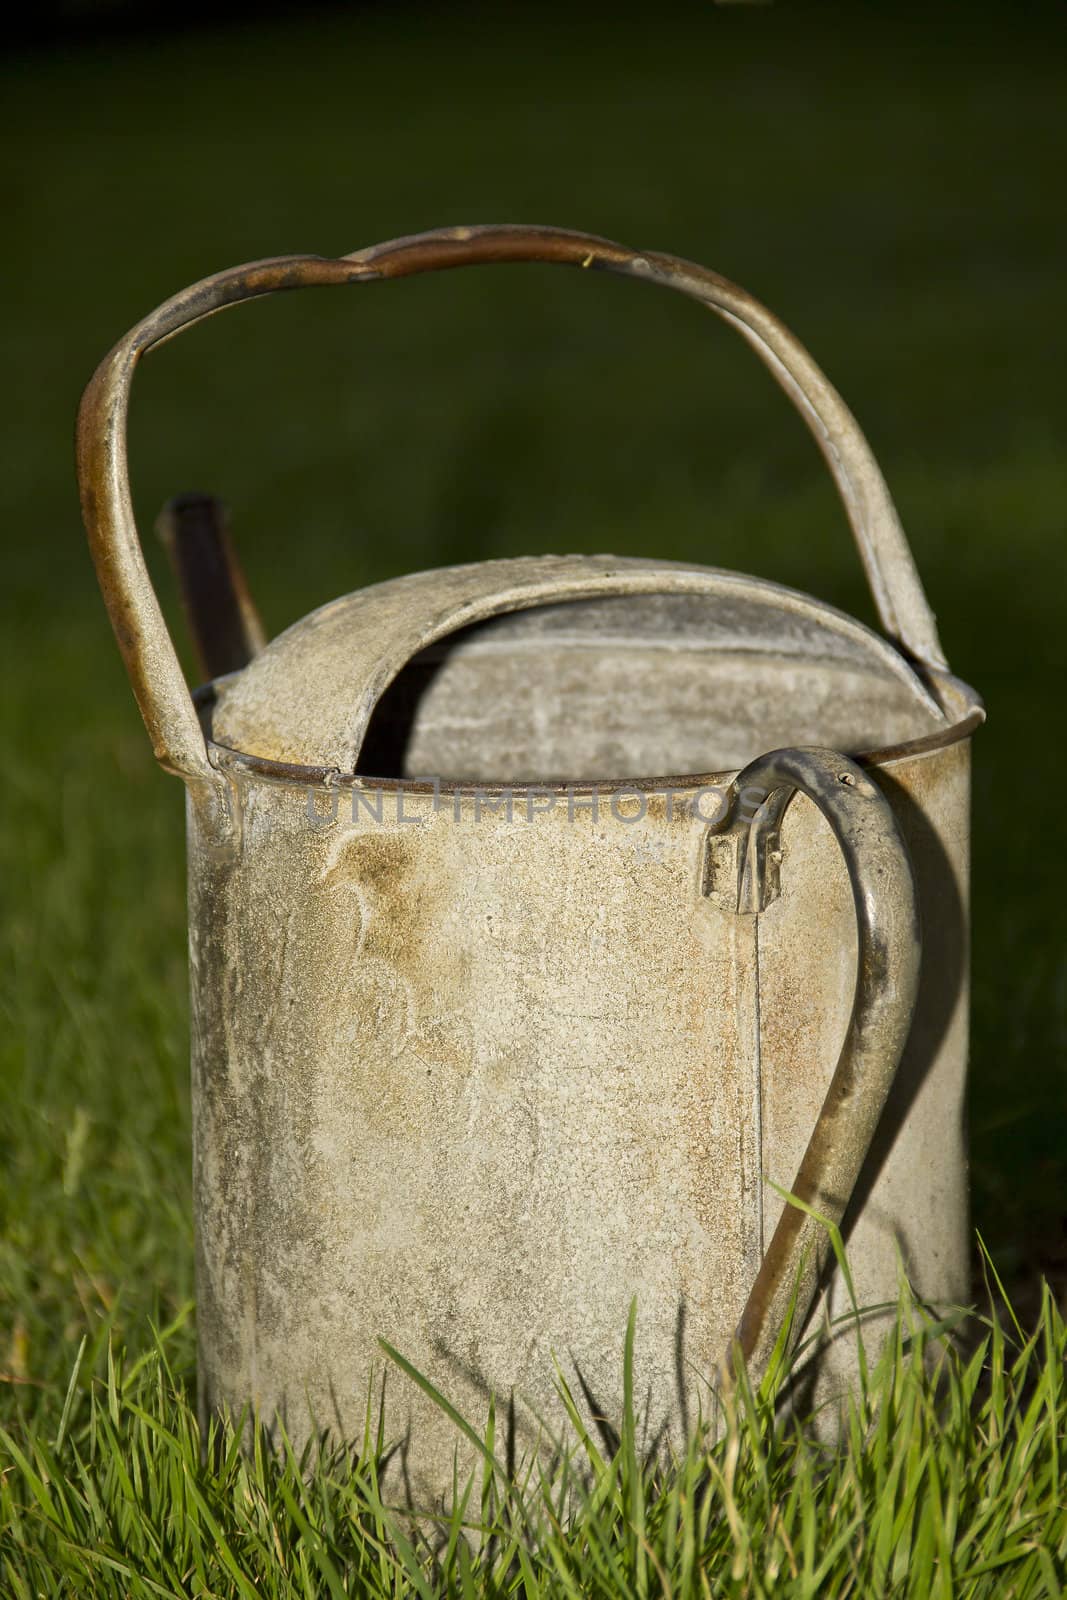 Definately seen better days but still going strong this old and weathered watering can